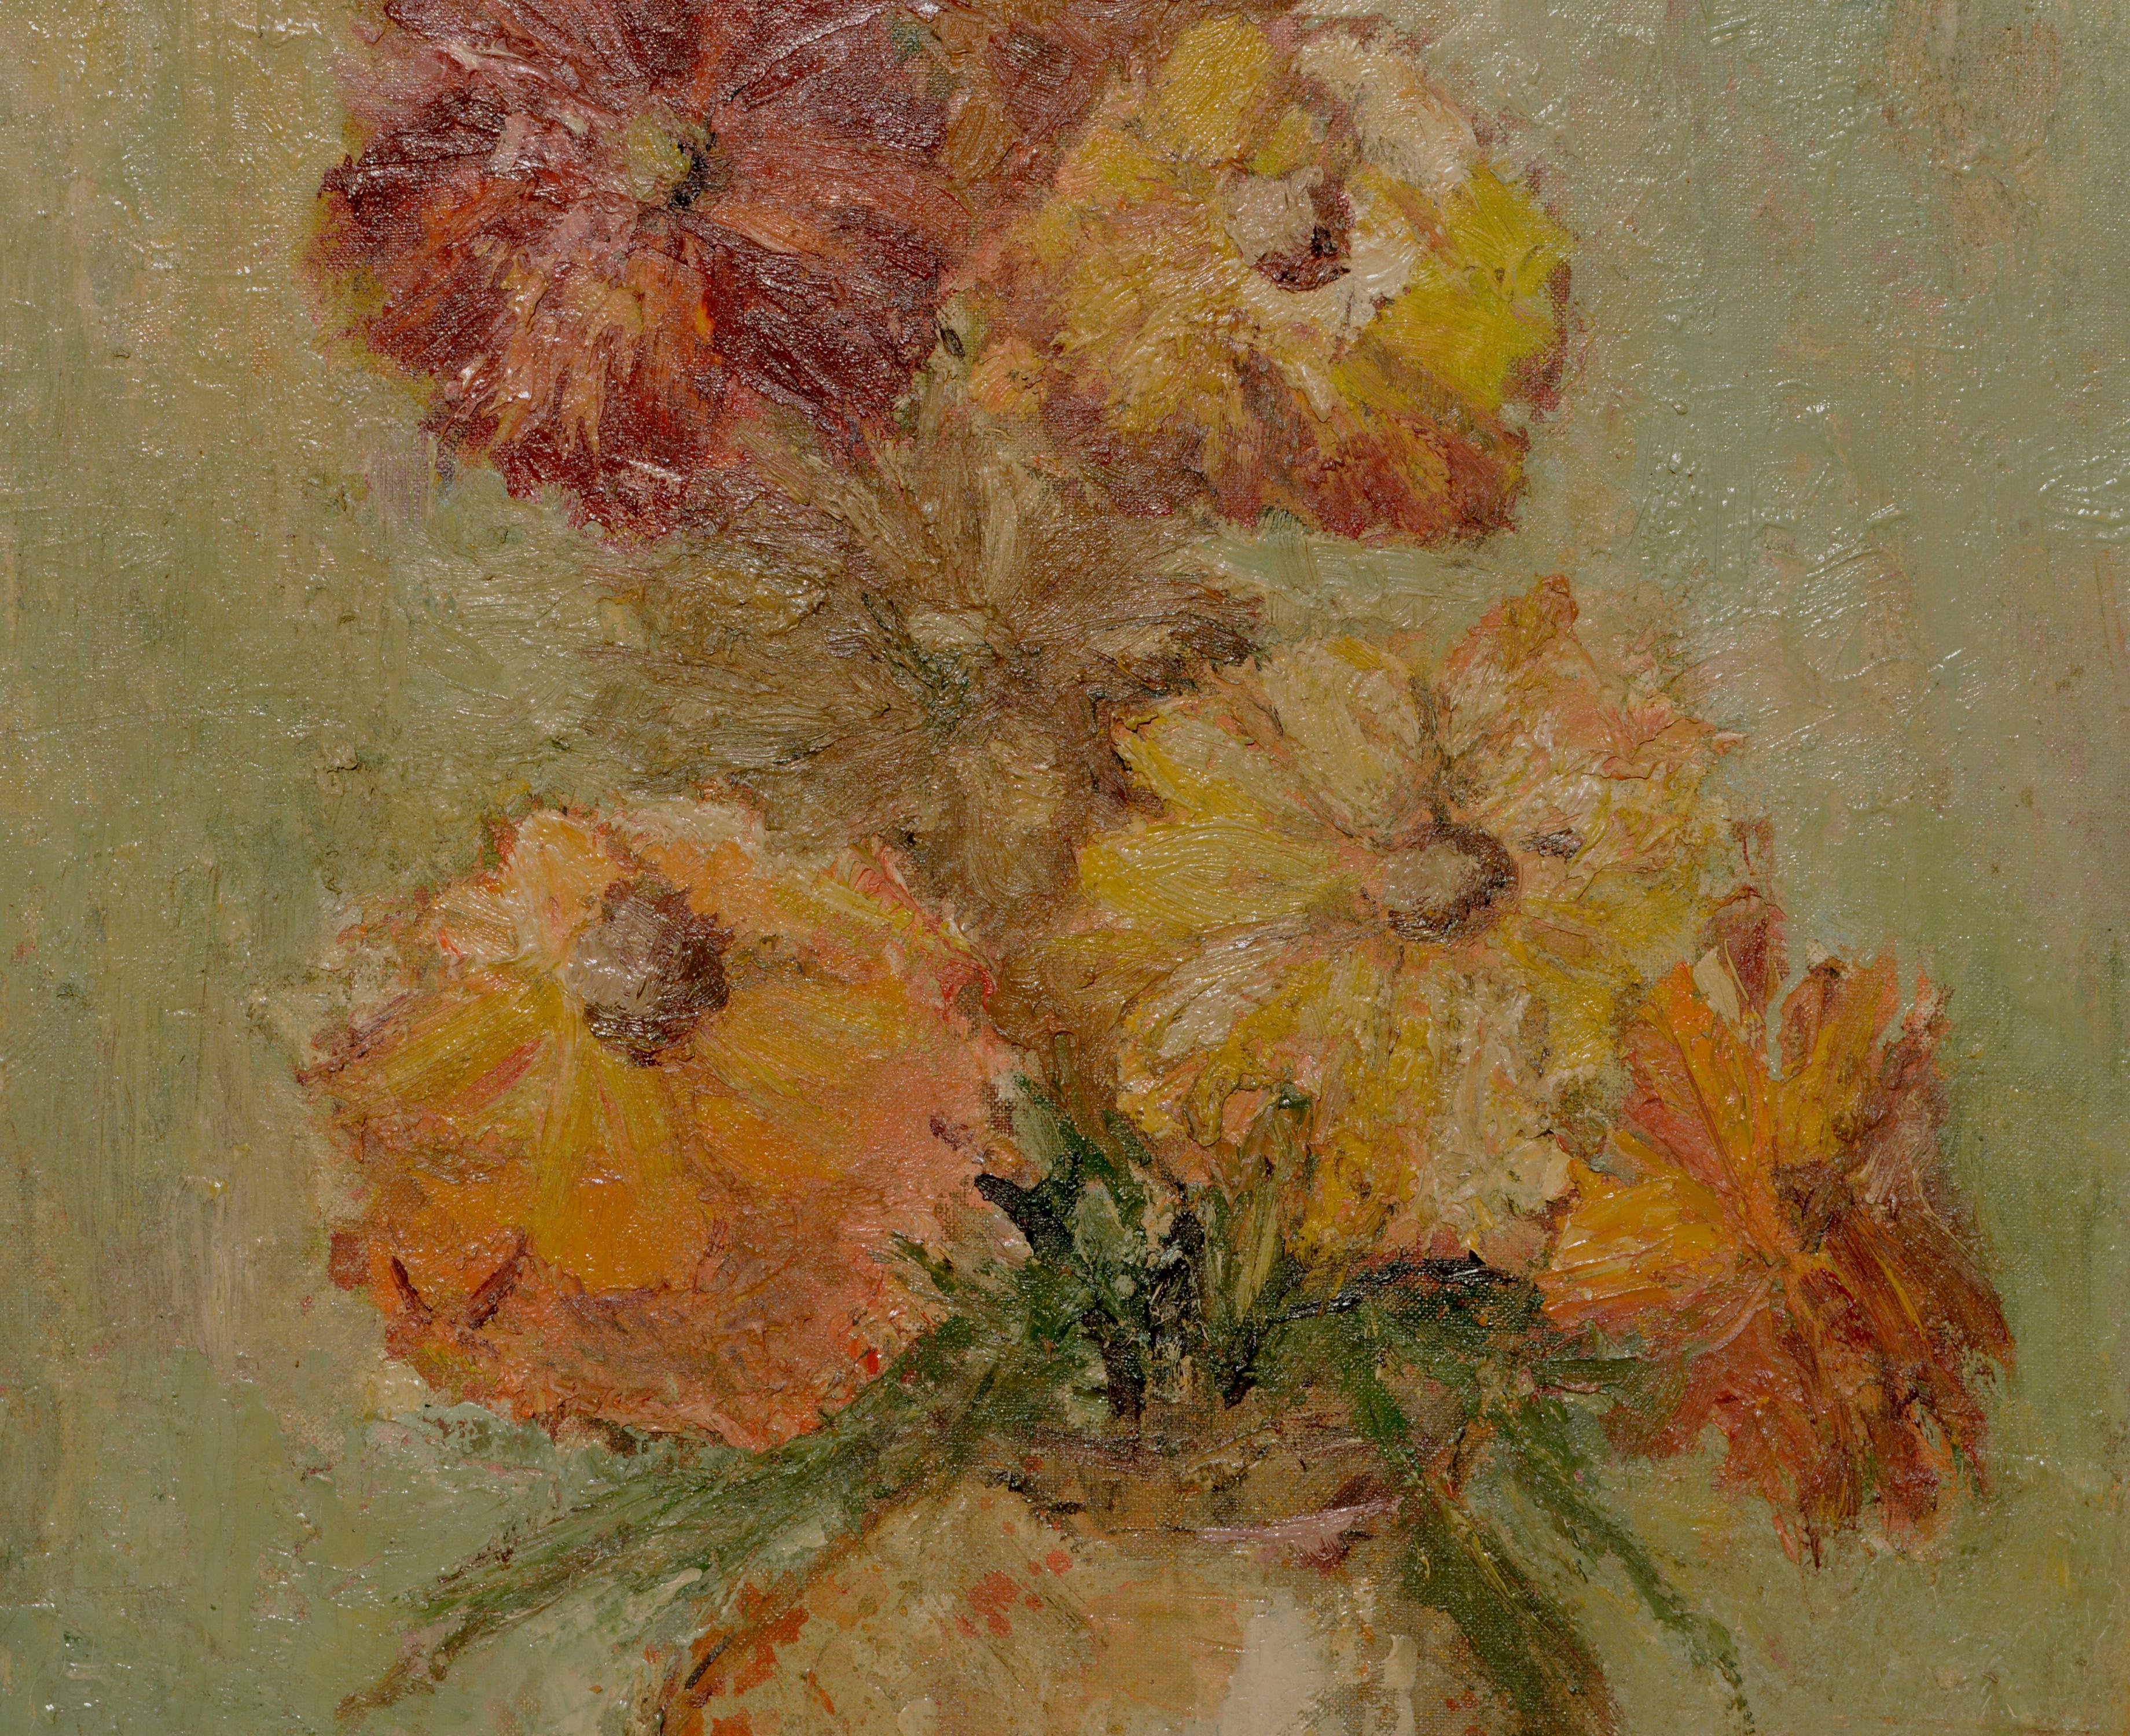 Mid Century Floral Still-Life - Brown Still-Life Painting by Unknown